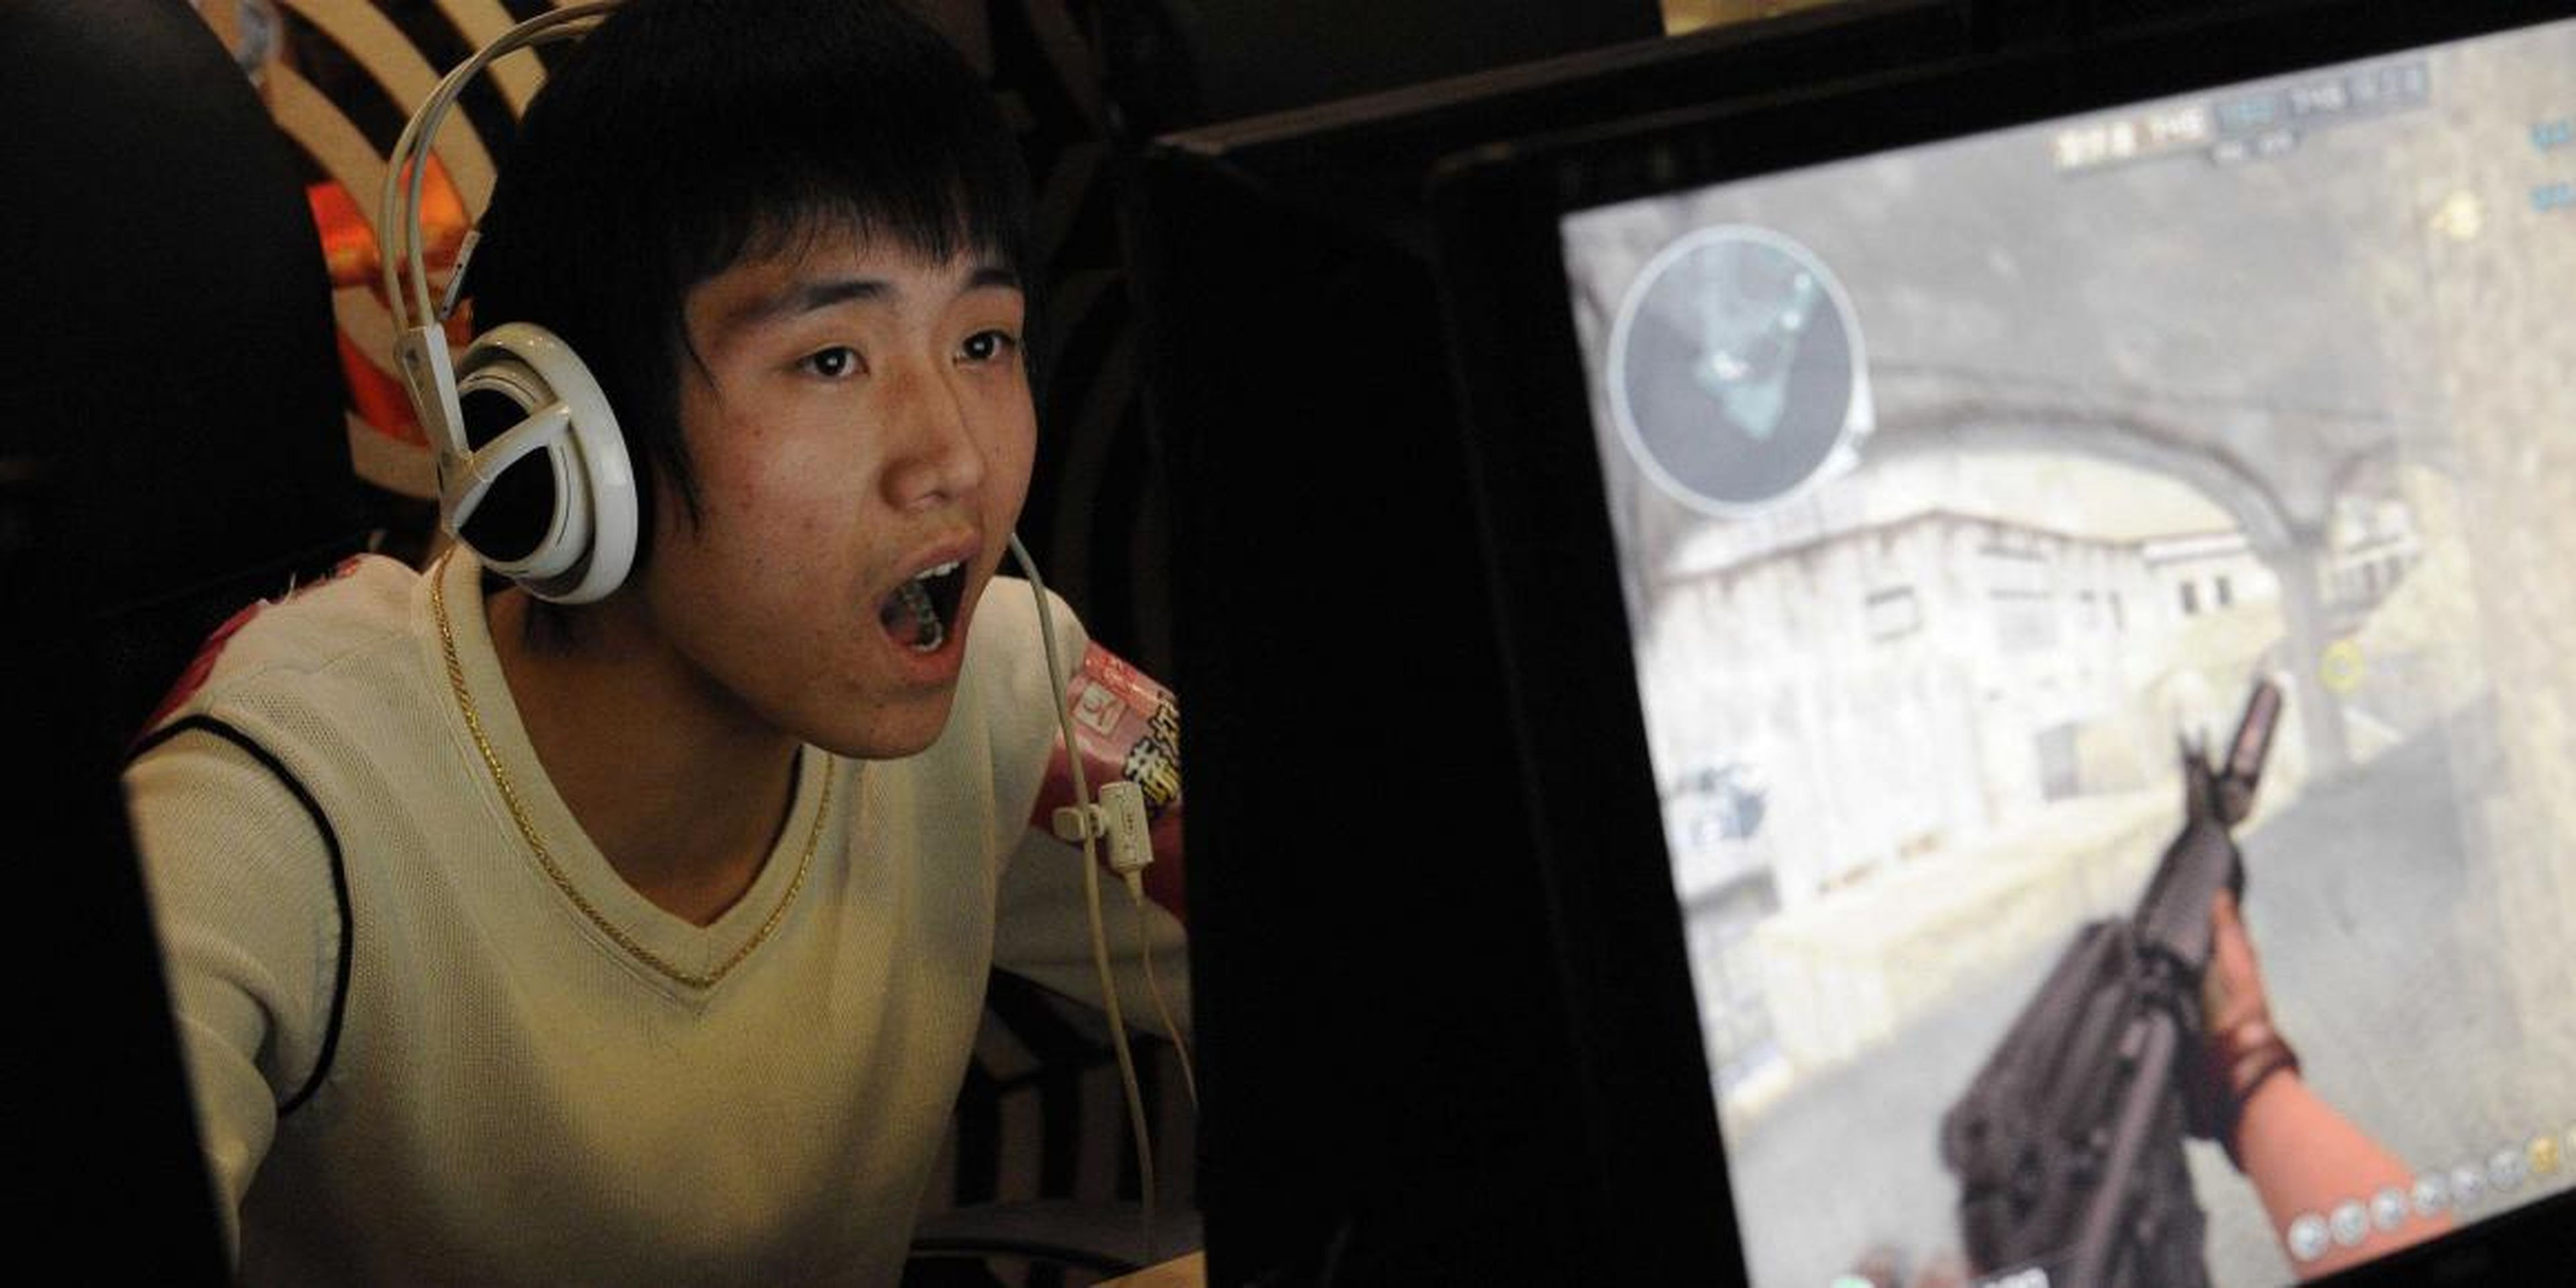 A gamer playing online games at an internet cafe in Taiyuan, in China's Shanxi province, in 2010.